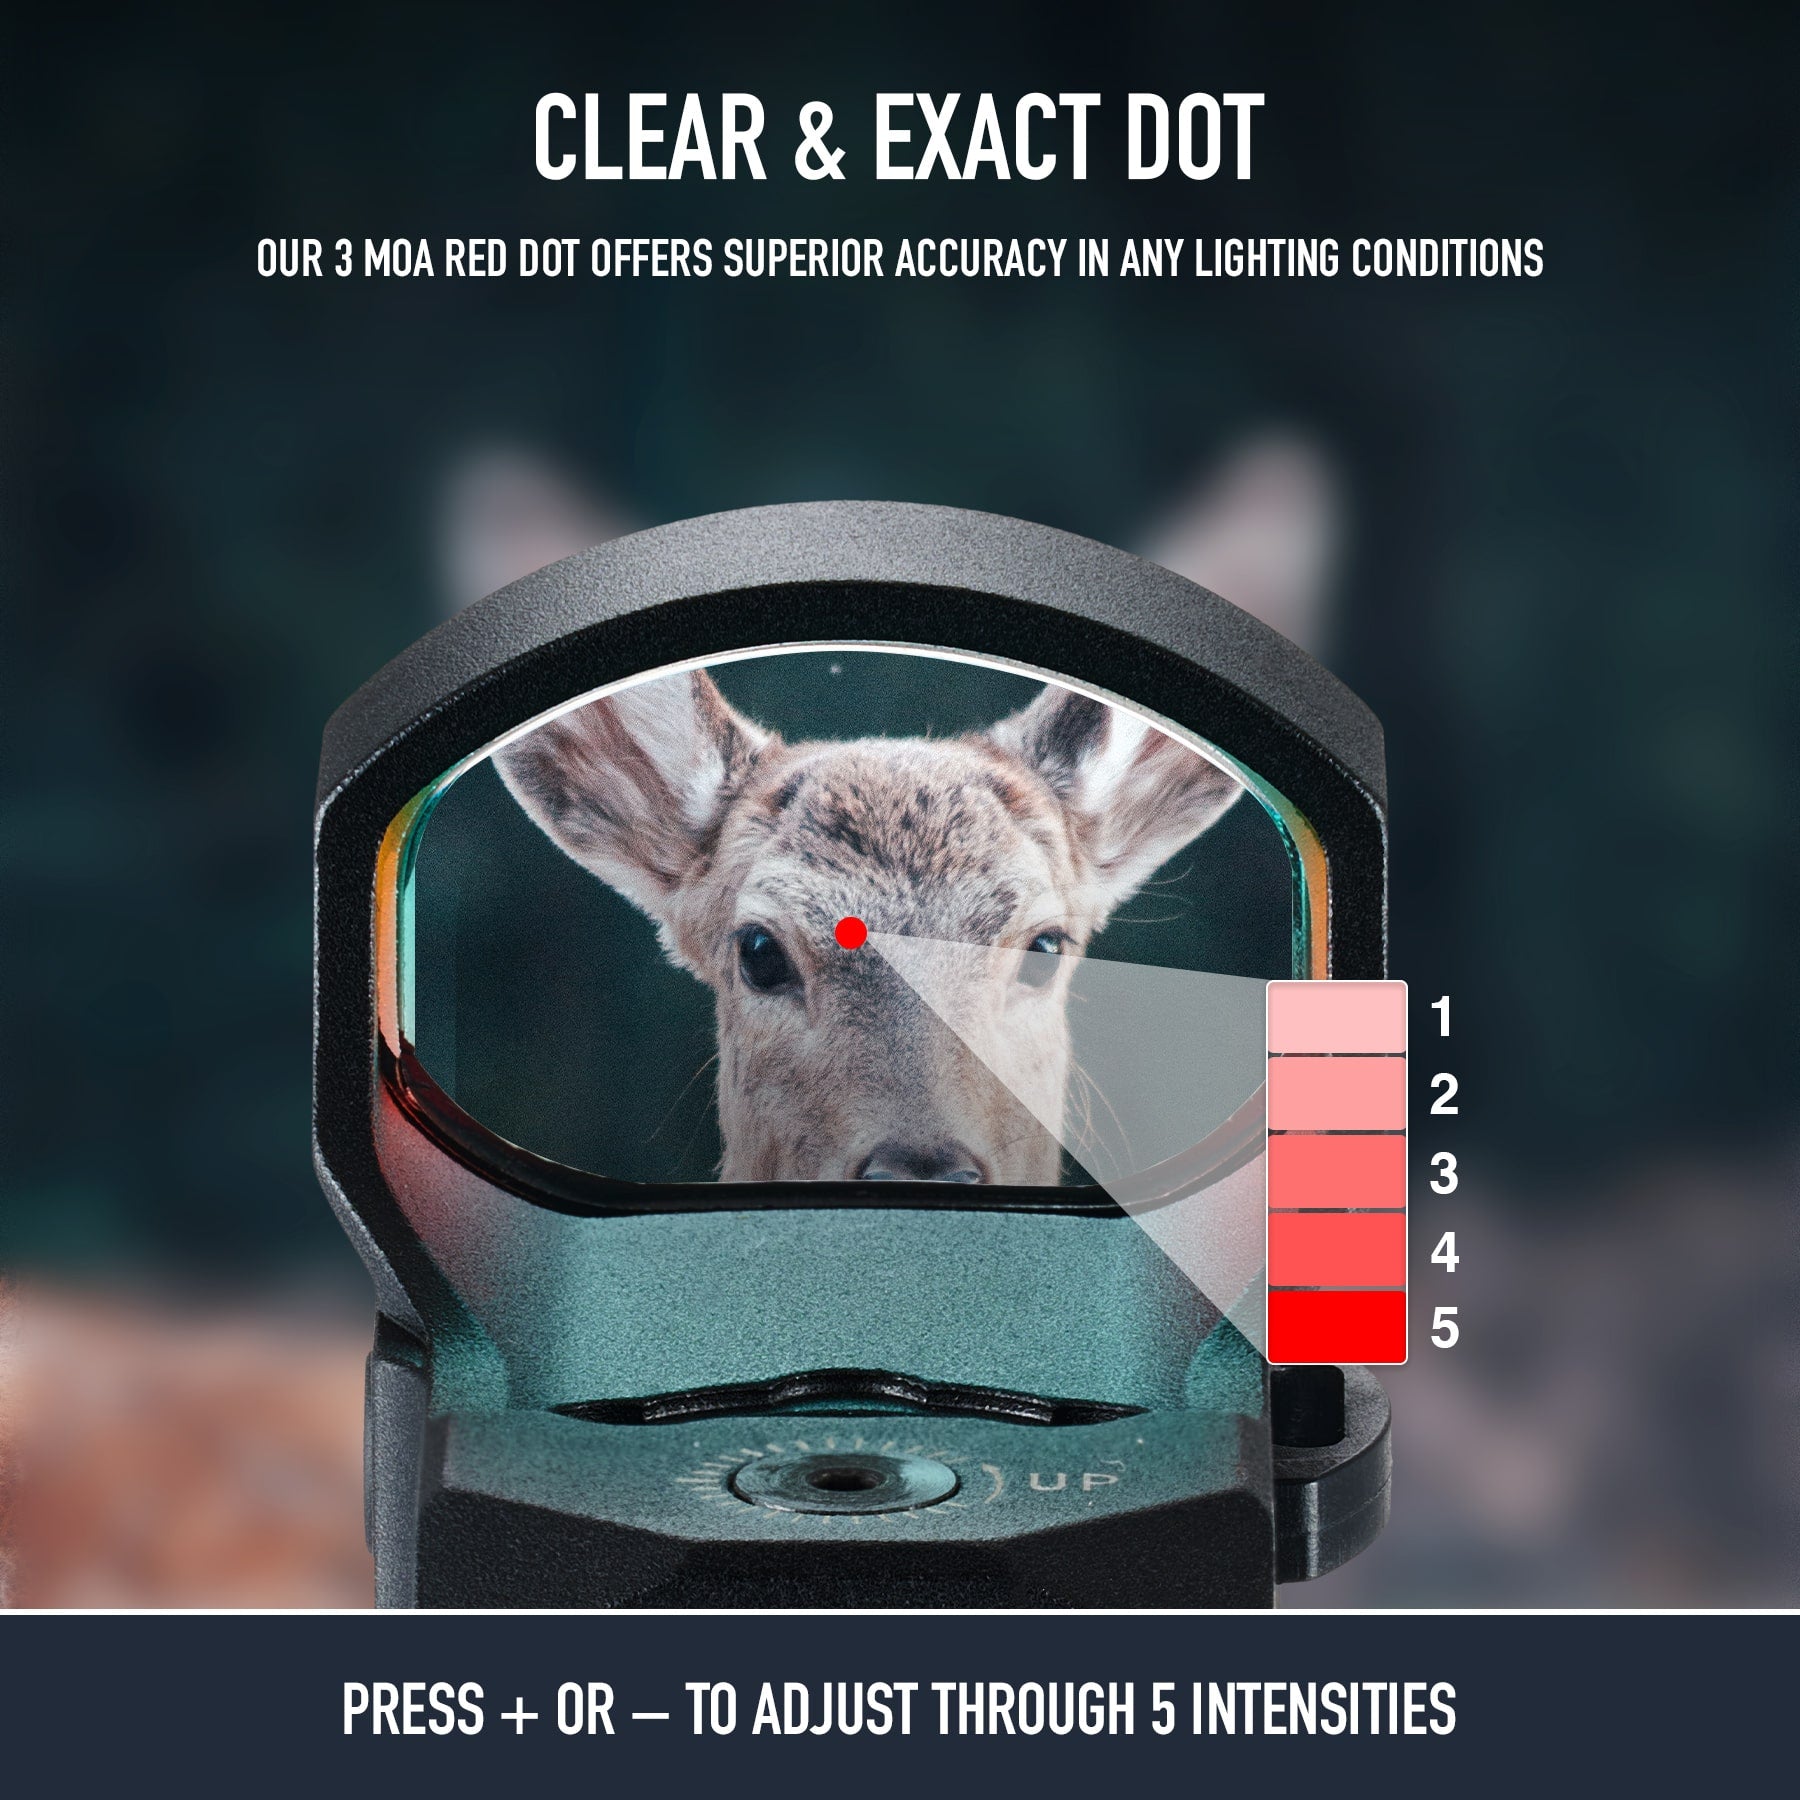 reflex-sights-aimpoint red dot-ak red dot 